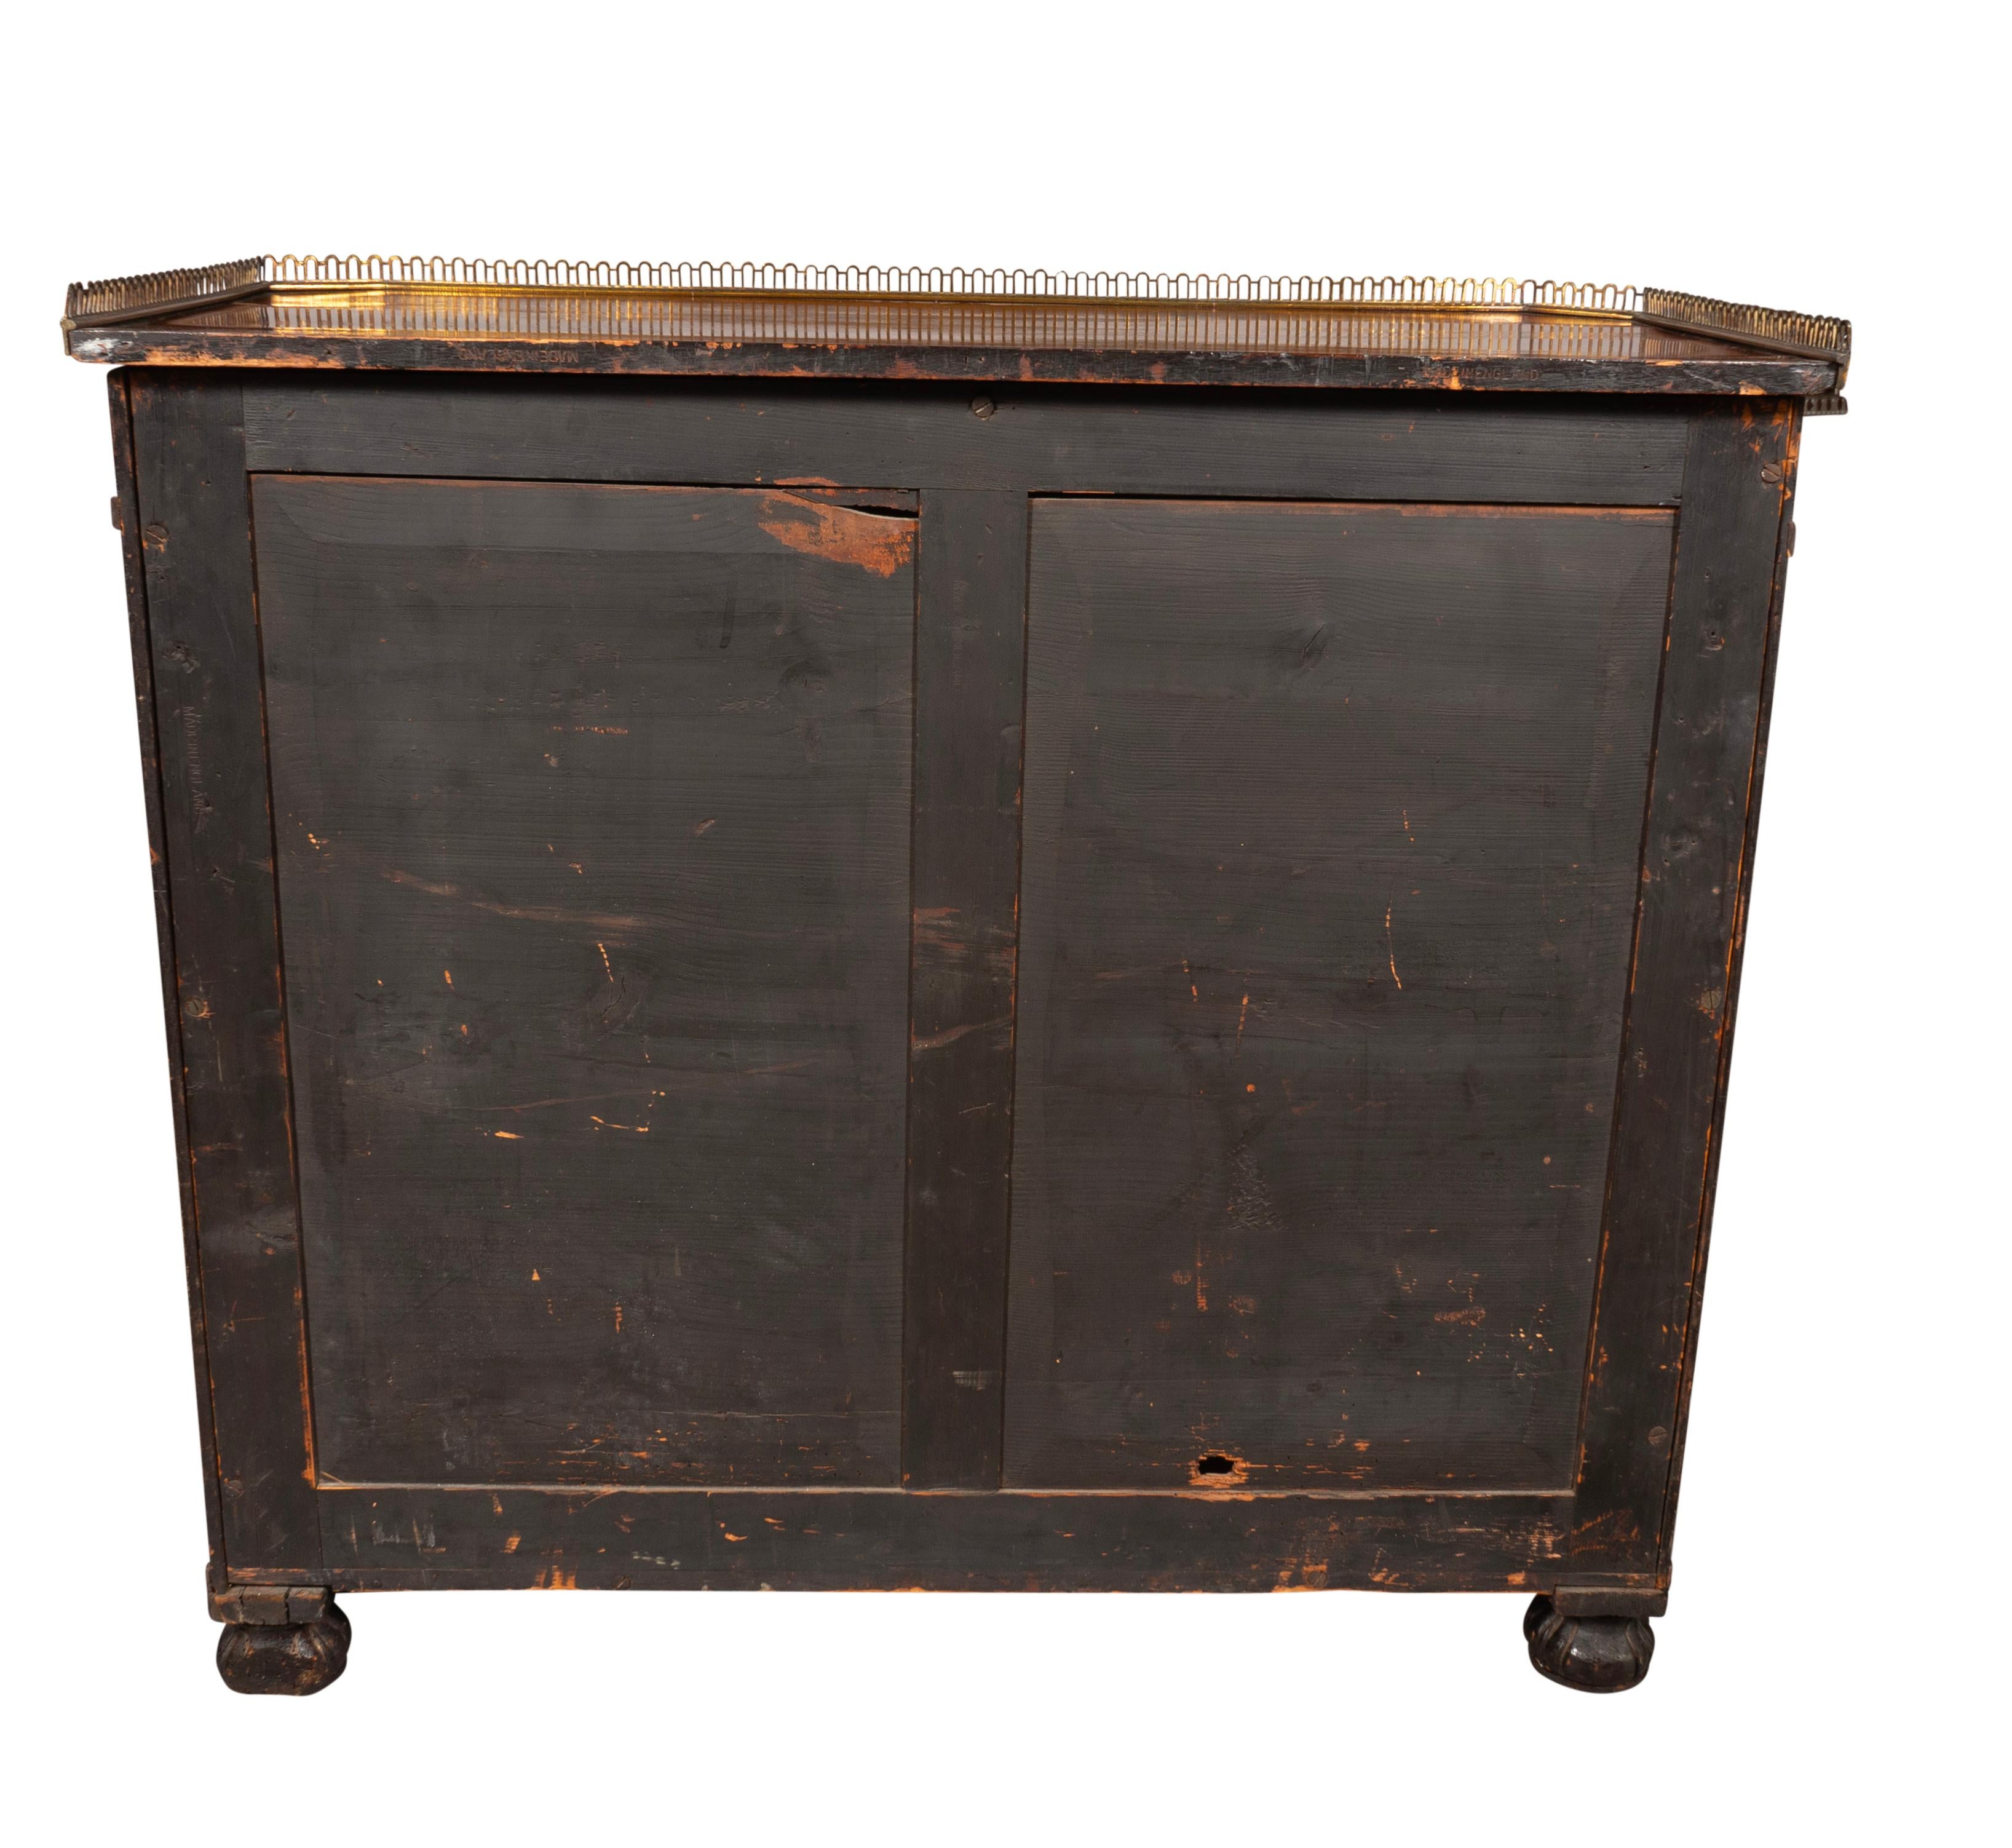 Early 19th Century Regency Rosewood And Brass Inlaid Credenza For Sale